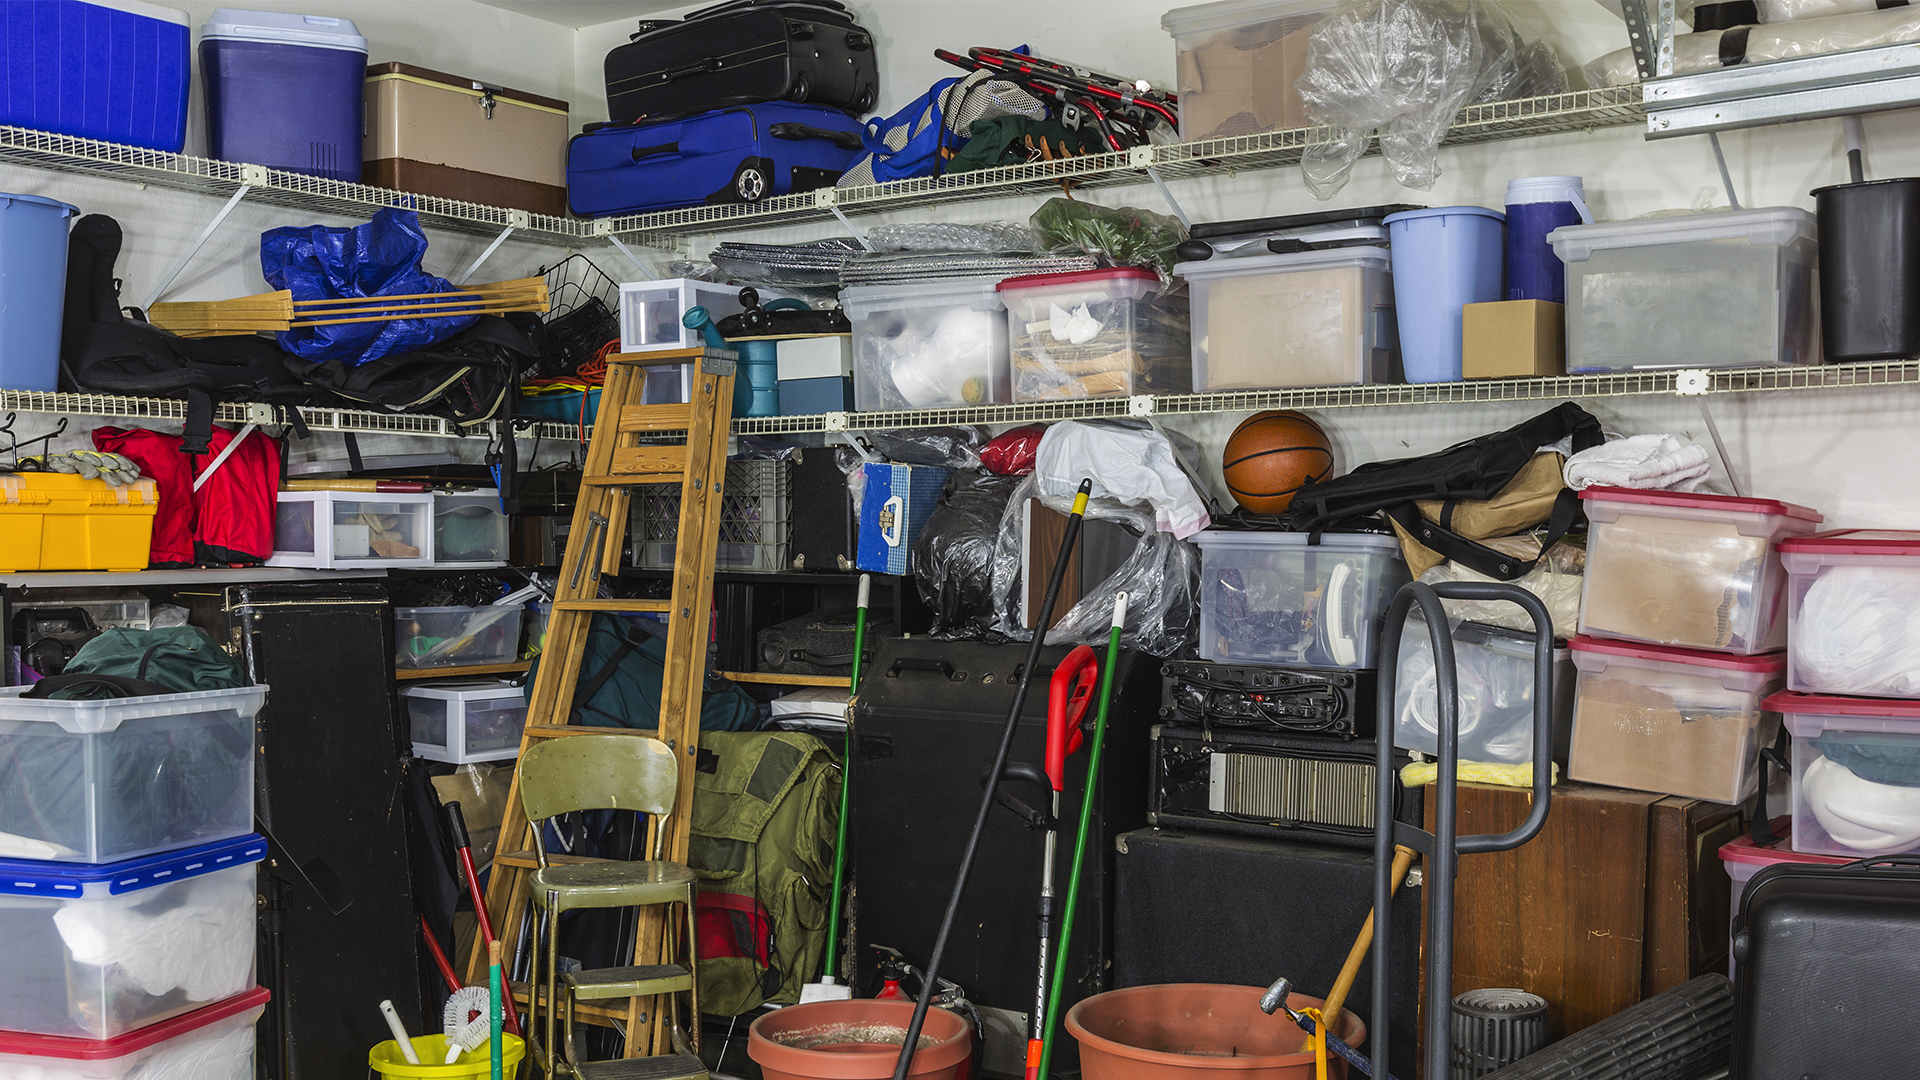 A messy garage filled with crap.